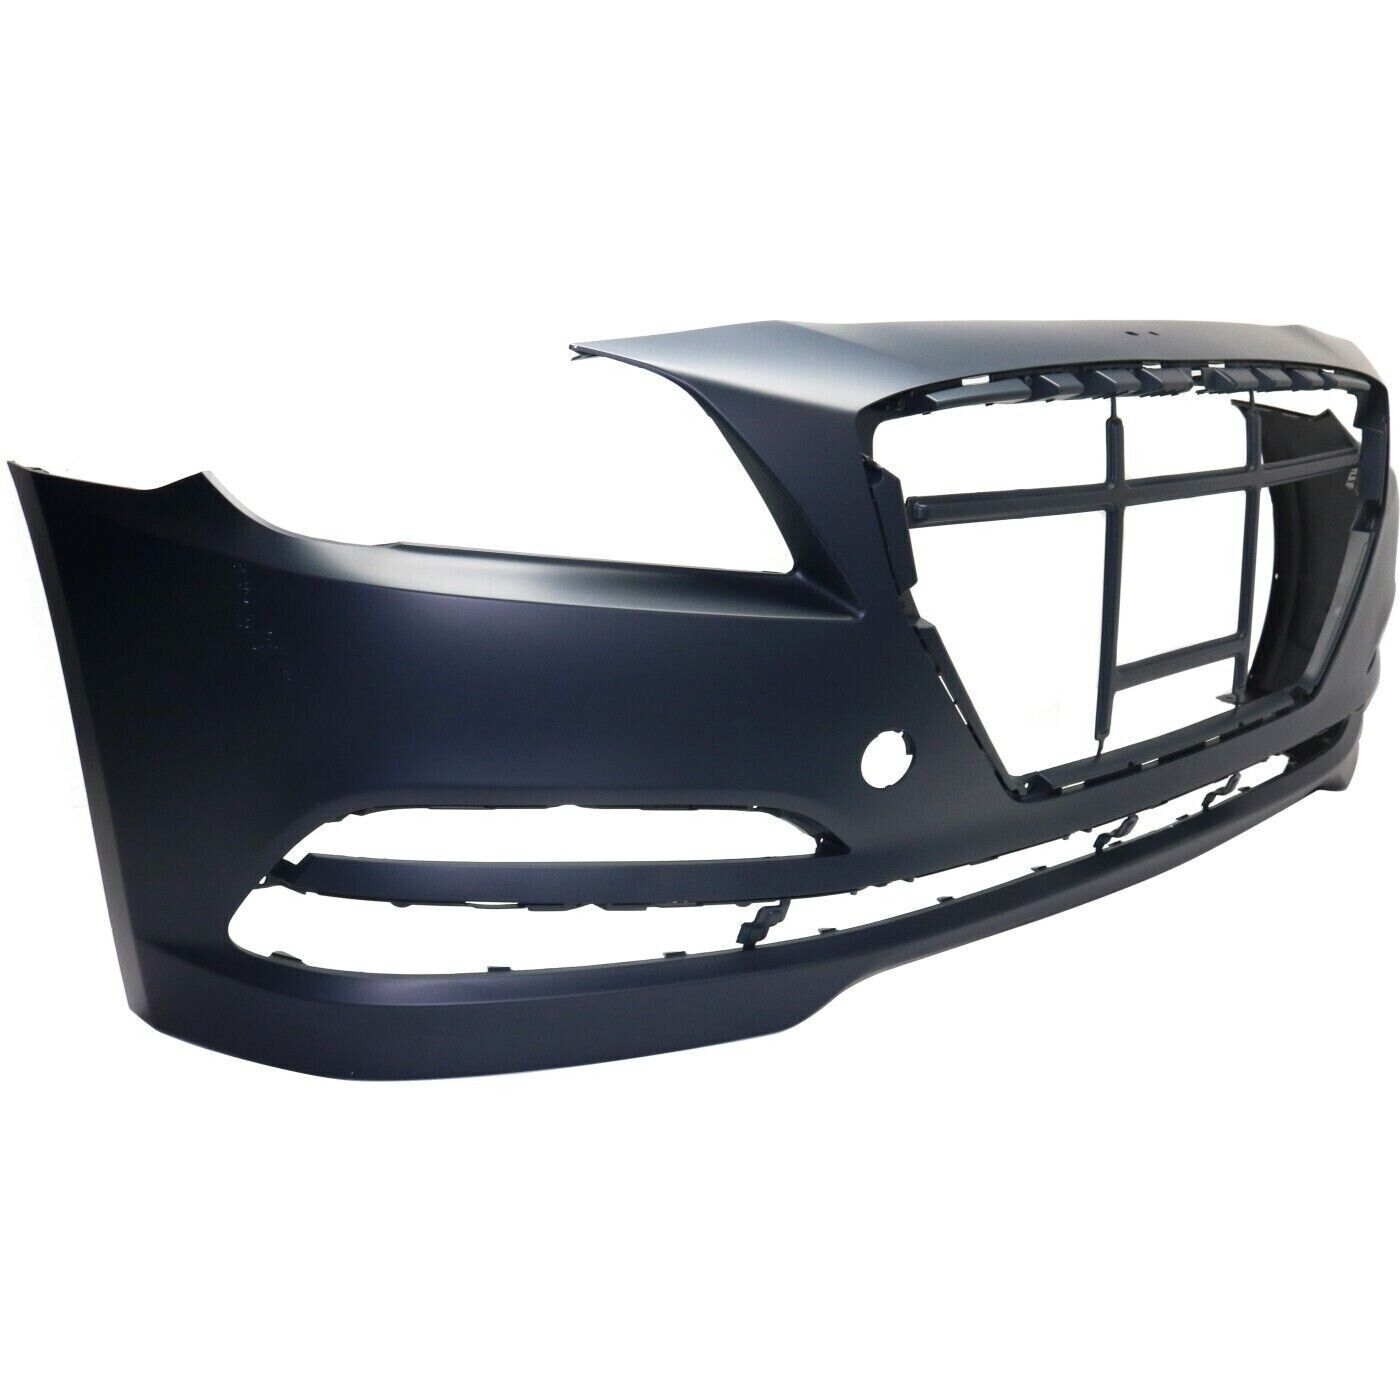 2015-2016 HYUNDAI GENESIS; Front Bumper Cover; 3.8L w/o Sensor w/o HL Washer Painted to Match